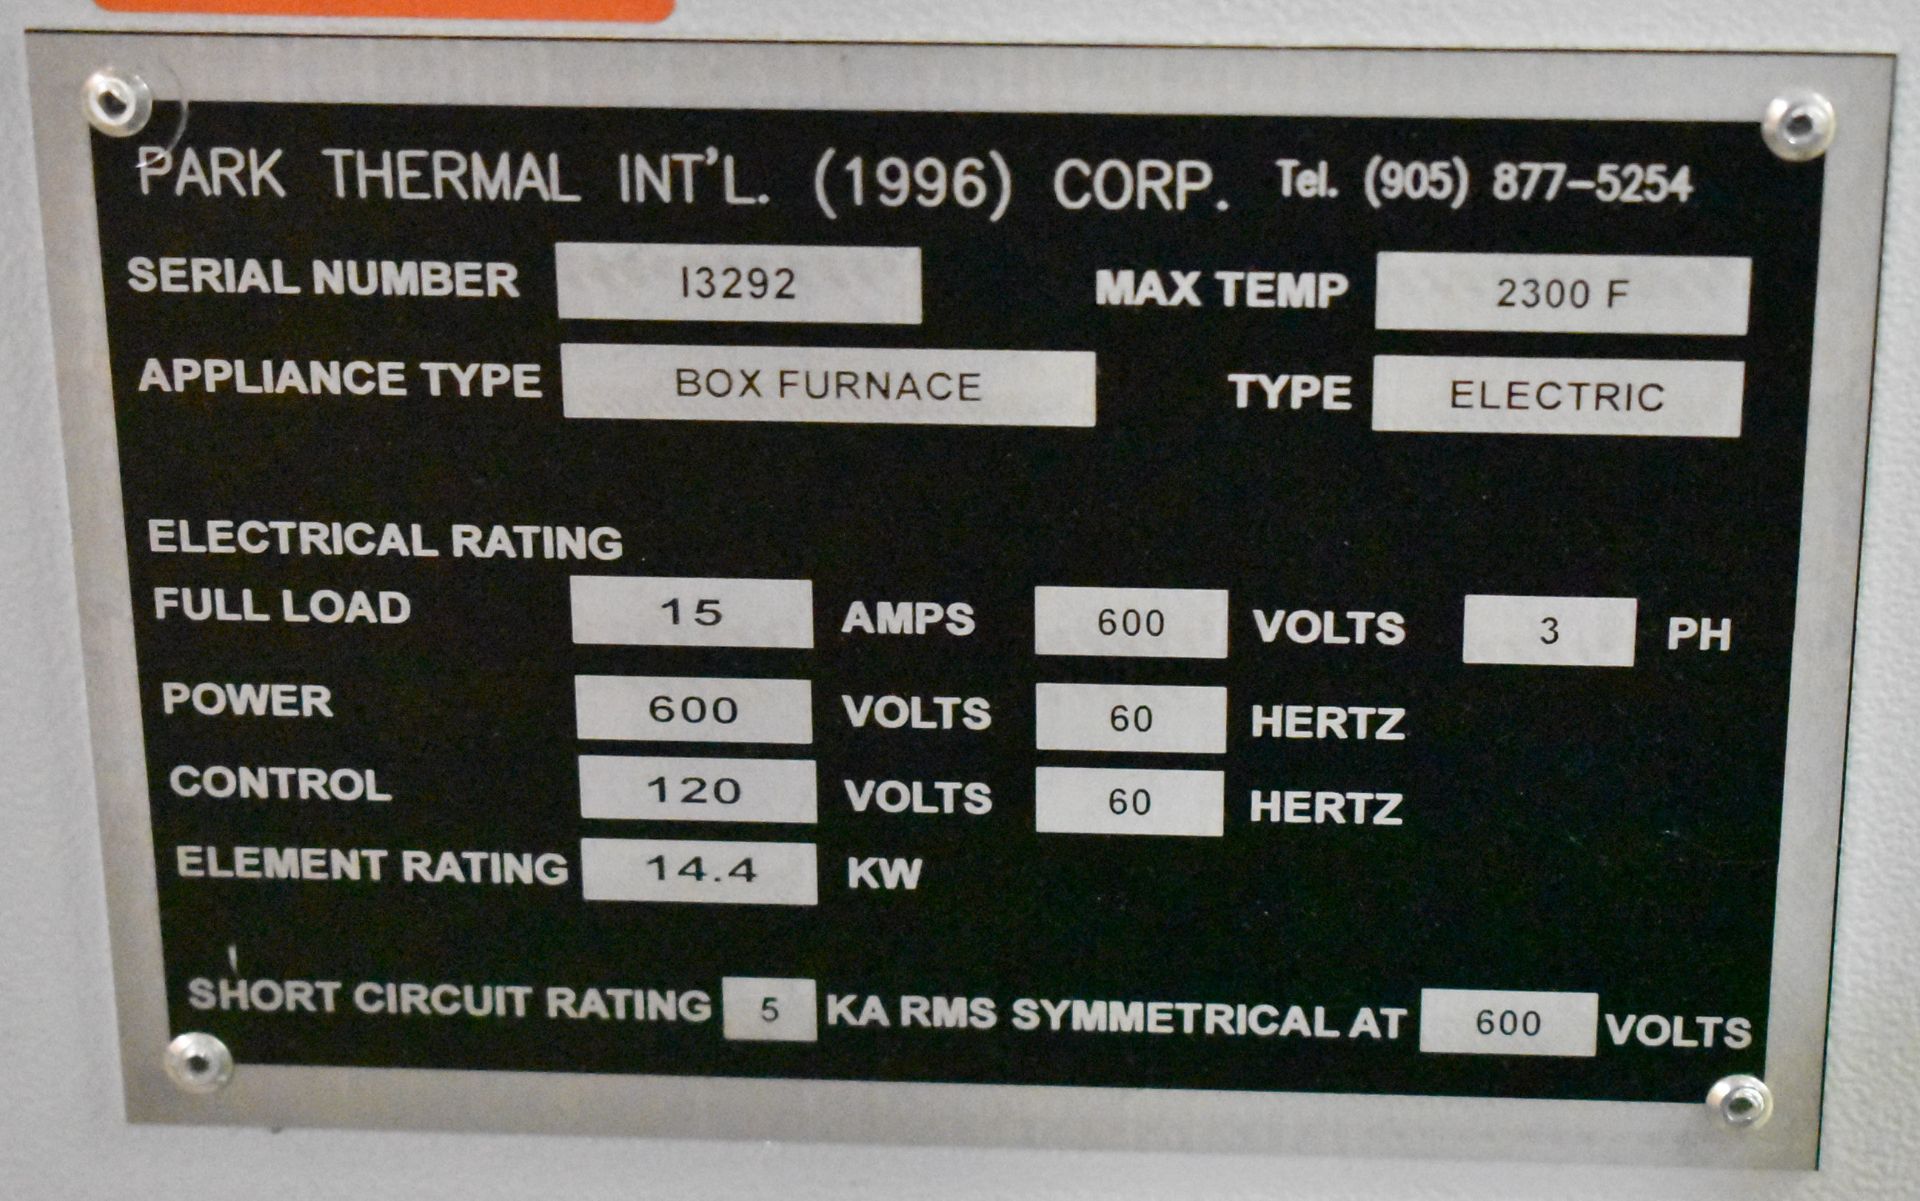 PARK THERMAL ELECTRIC BOX FURNACE WITH 2300 DEG. F. MAX. TEMPERATURE, 14.4 KW, 13.5"X12"X24"D - Image 5 of 5